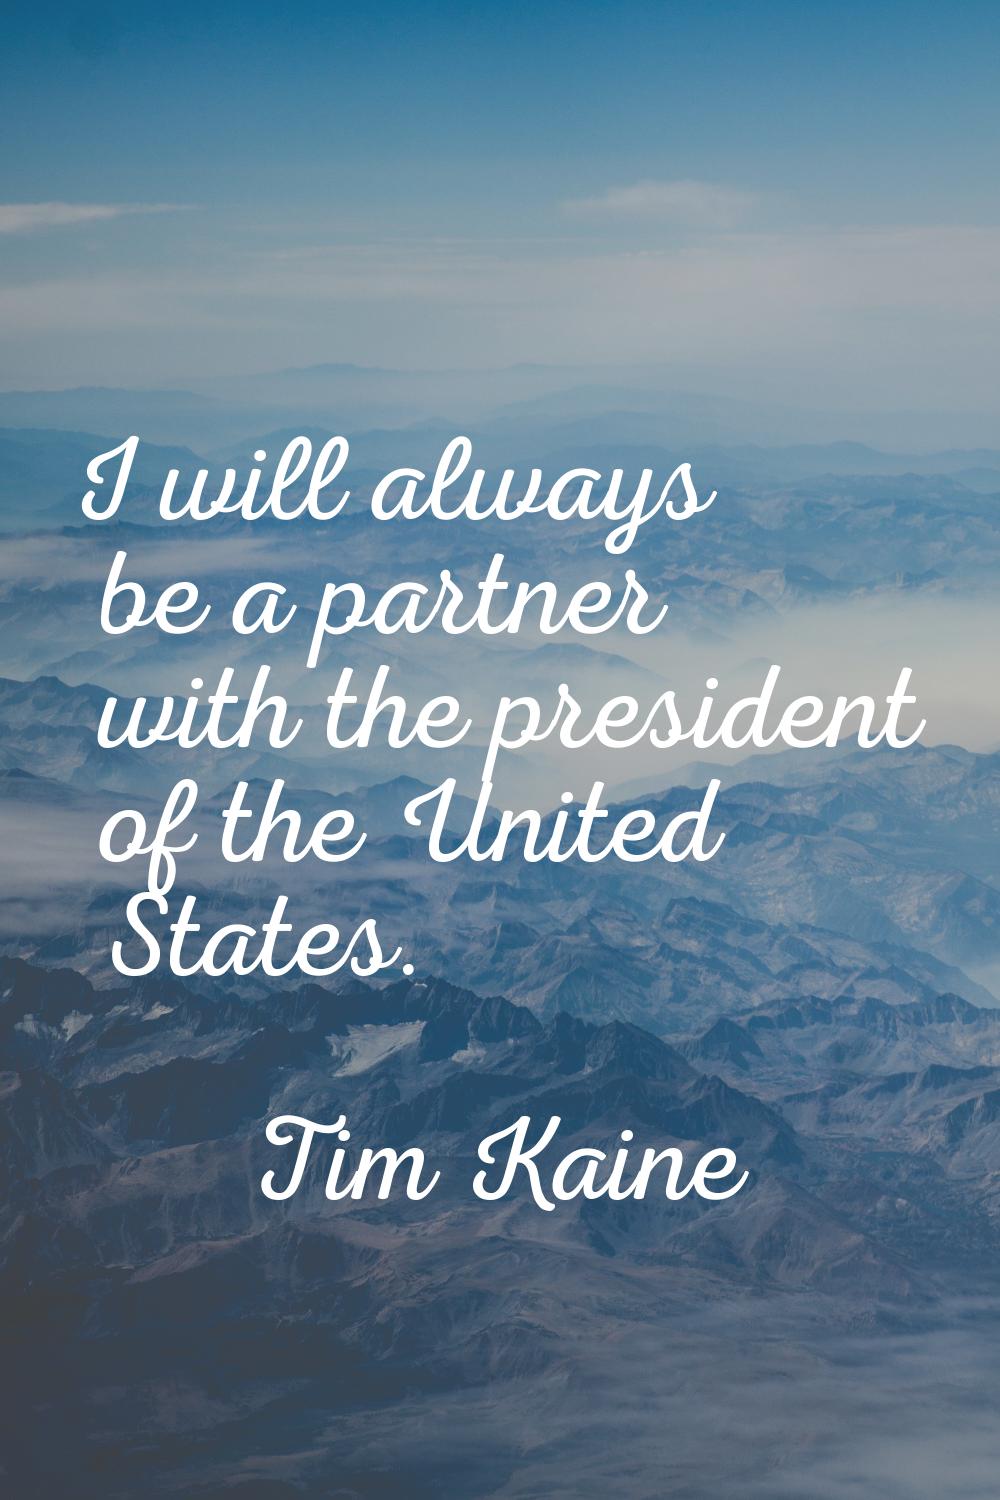 I will always be a partner with the president of the United States.